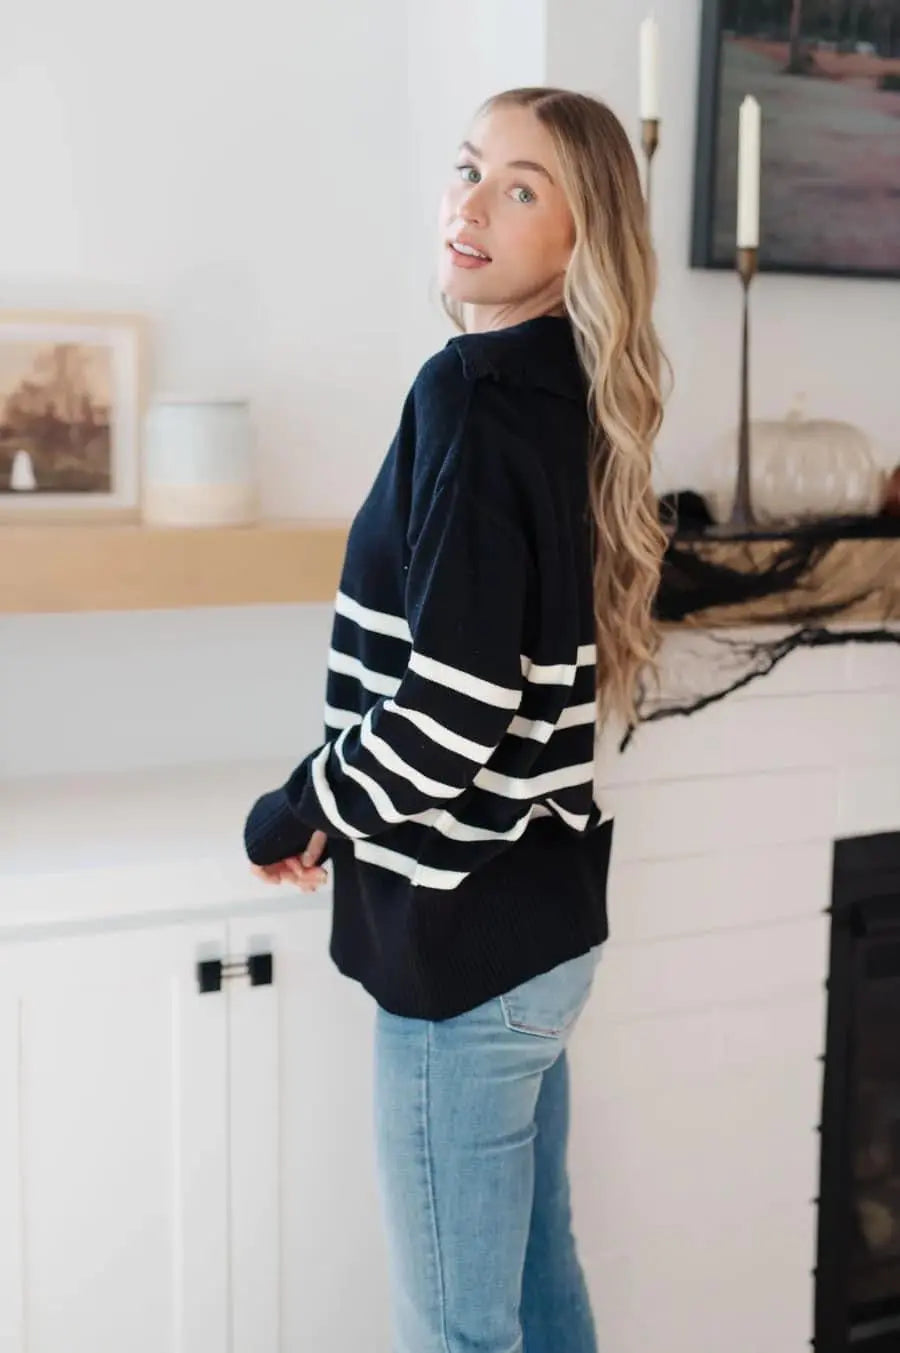 From Here On Out Striped Sweater-Styled by Steph-Styled by Steph-Women's Fashion Clothing Boutique, Indiana